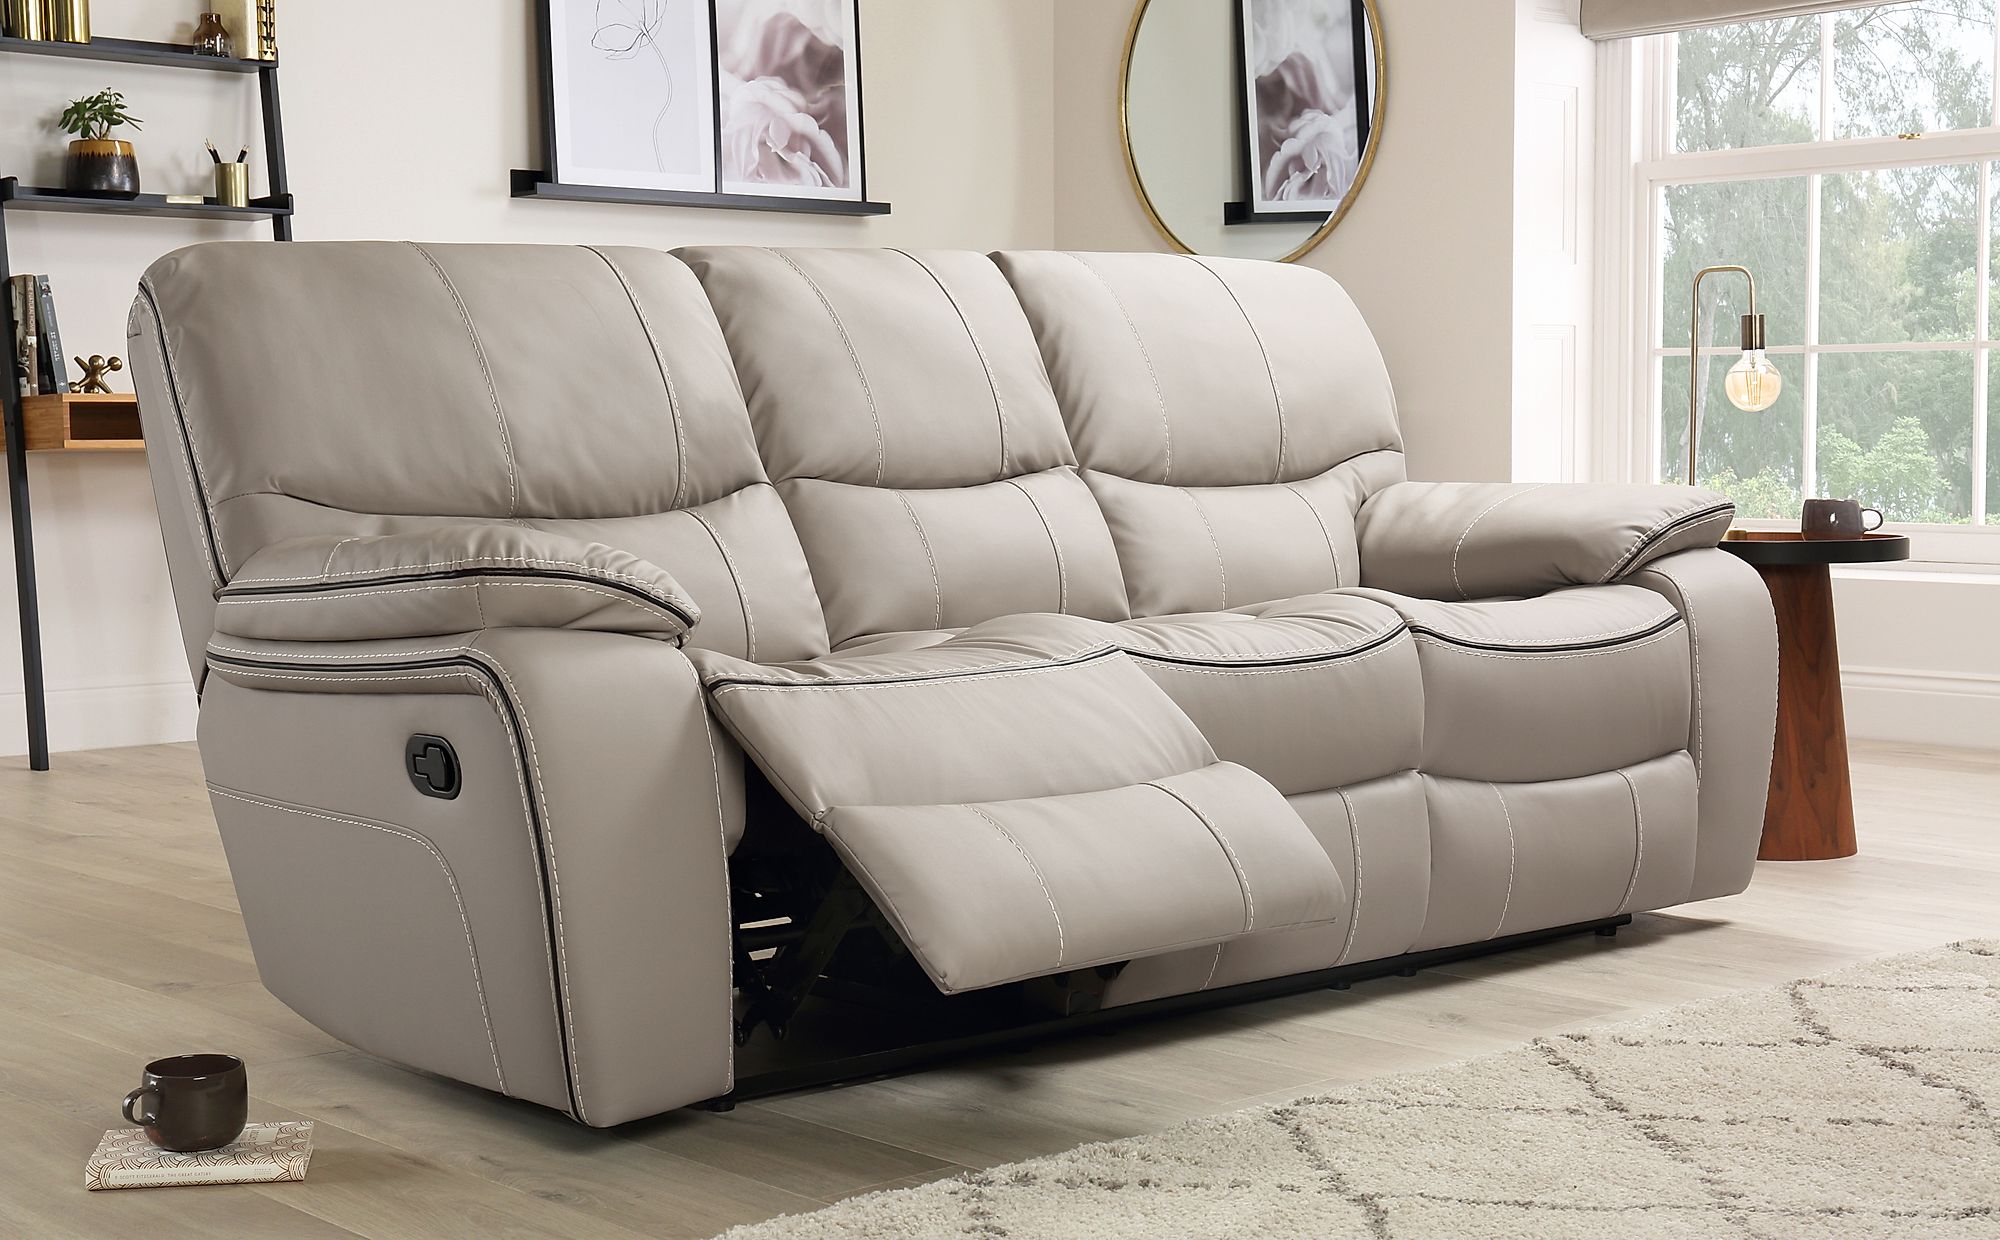 Beaumont Taupe Leather 3 Seater Recliner Sofa Furniture